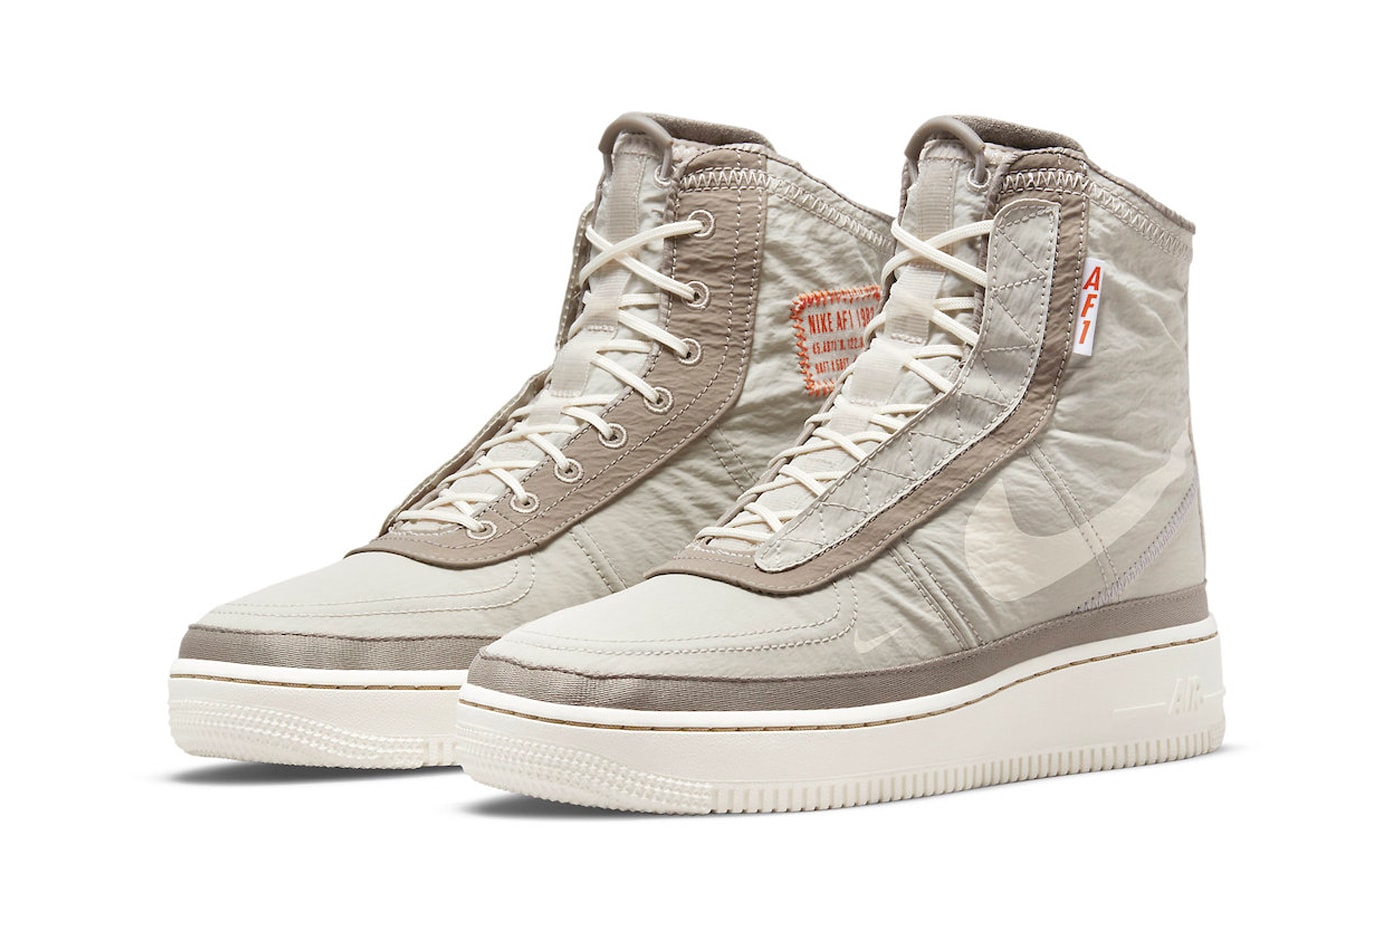 official images Nike Air Force 1 sHell DO7450 211 2021 150 USD price release info water repellent textil adjustable collar sail orange exposed stitching rubber fall winter